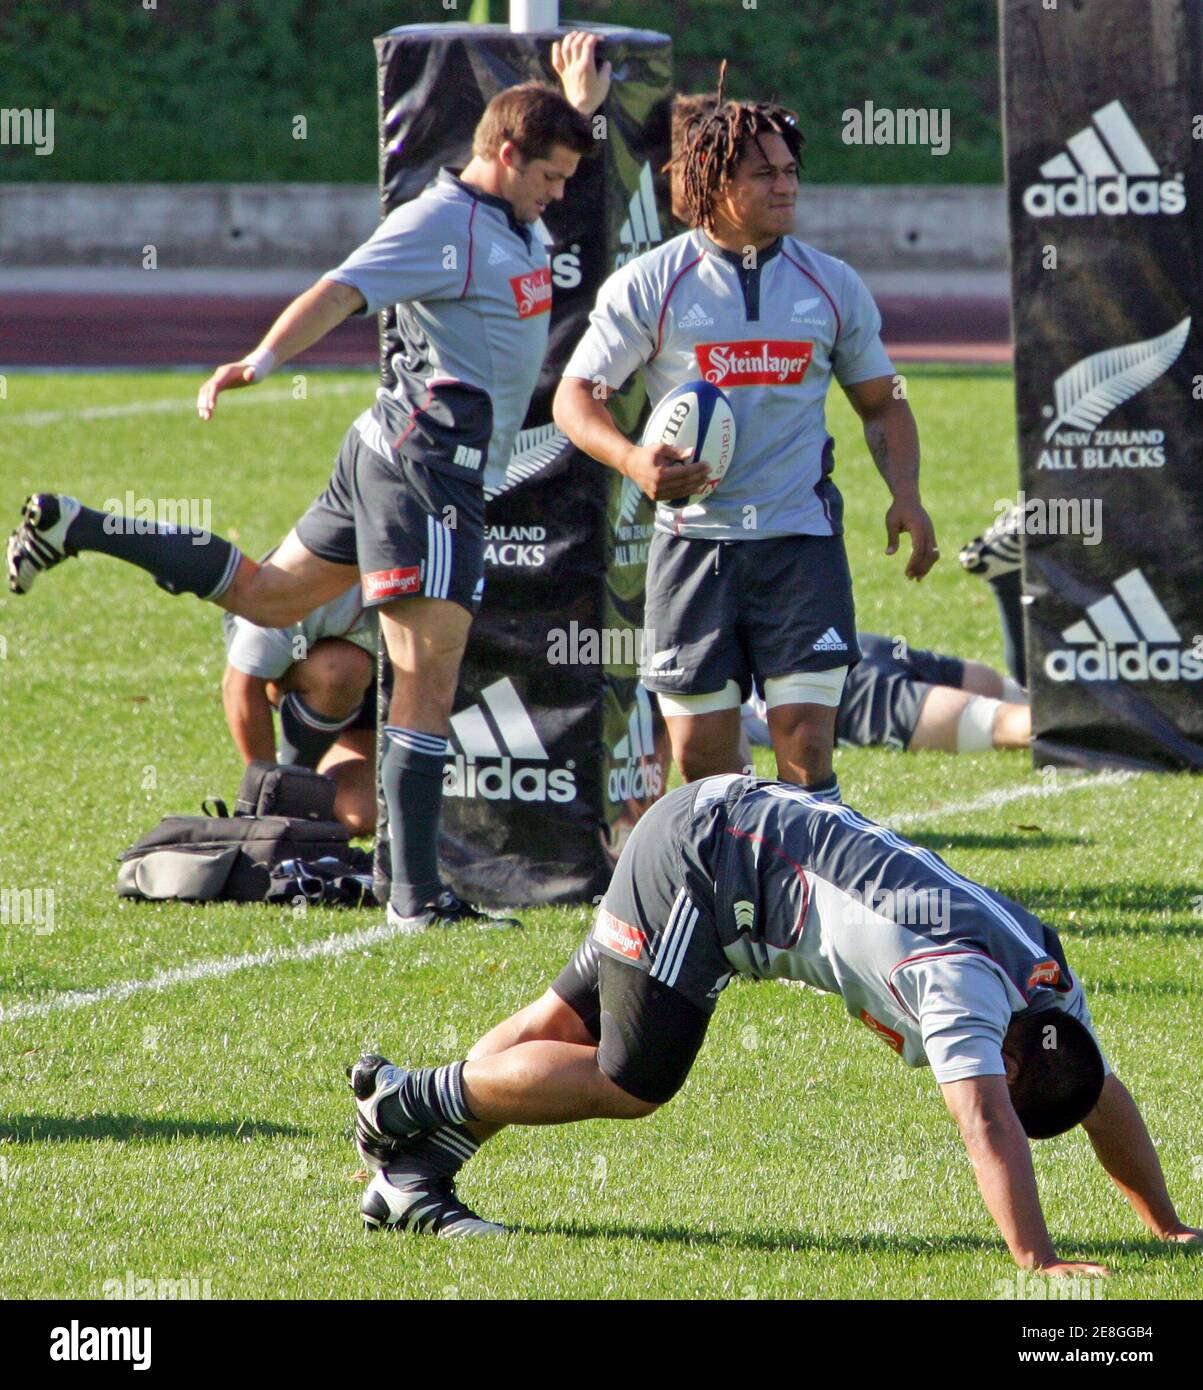 New Zealand's All Blacks players stretch during a training session in  Marseille, November 8, 2006. The All Blacks team will face France on  Saturday's rugby union test match in Lyon. REUTERS/Jean-Paul Pelissier (